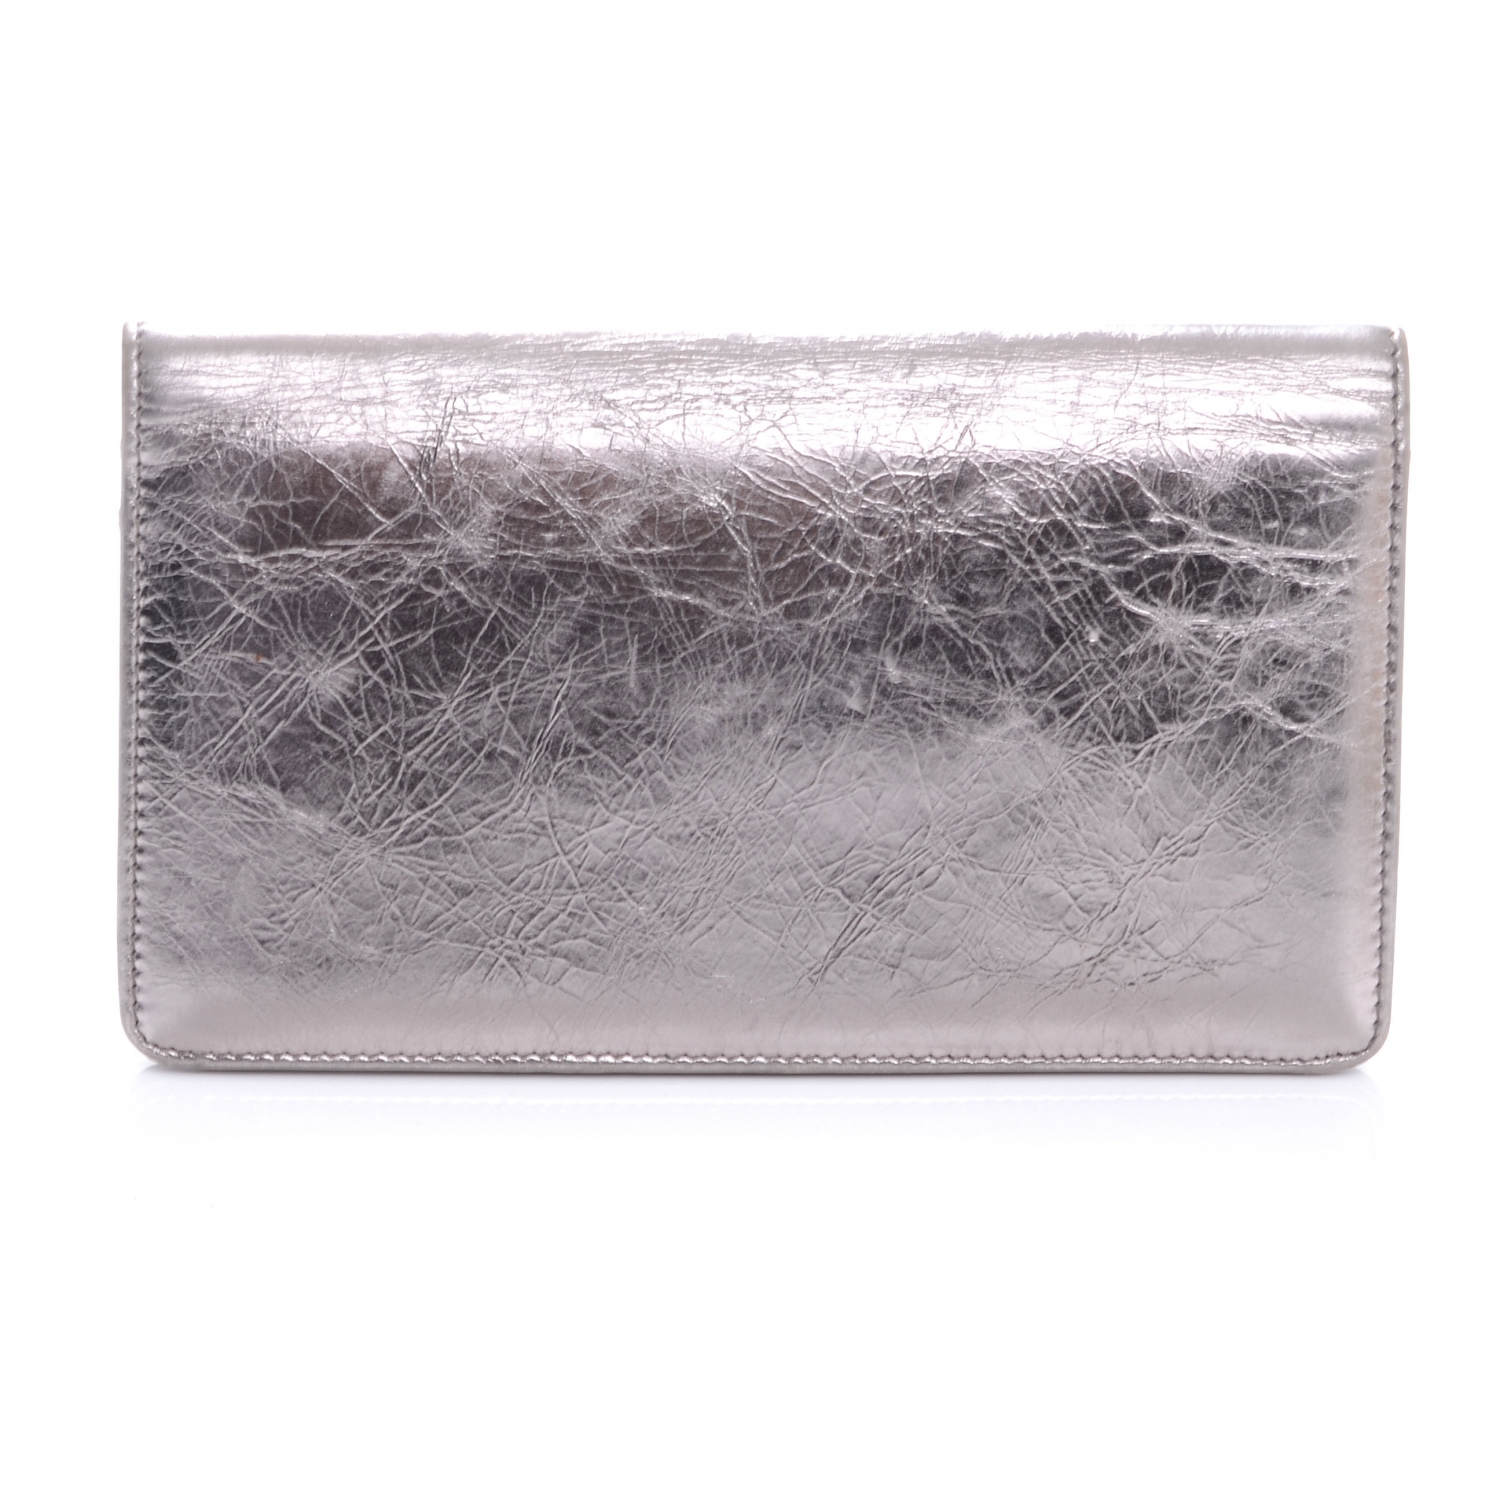 CHANEL Leather CC Bow Wallet Metallic Silver 46905